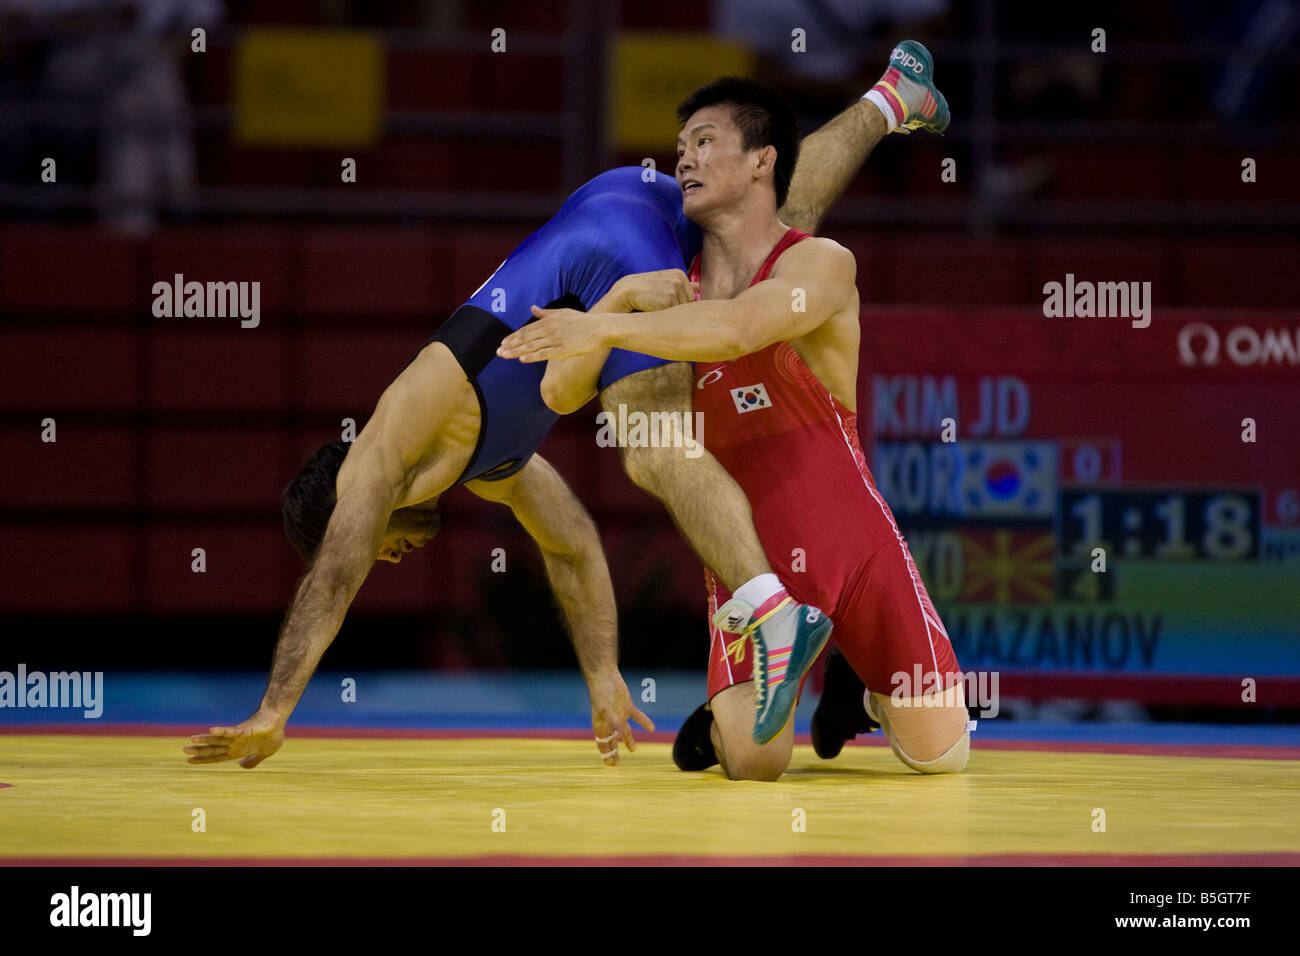 Dae Jong Kim KOR L competing against Muzad Ramazanov MKD in the 60kg freestyle wrestling 1 8 final event at the 2008 Olympic Sum Stock Photo